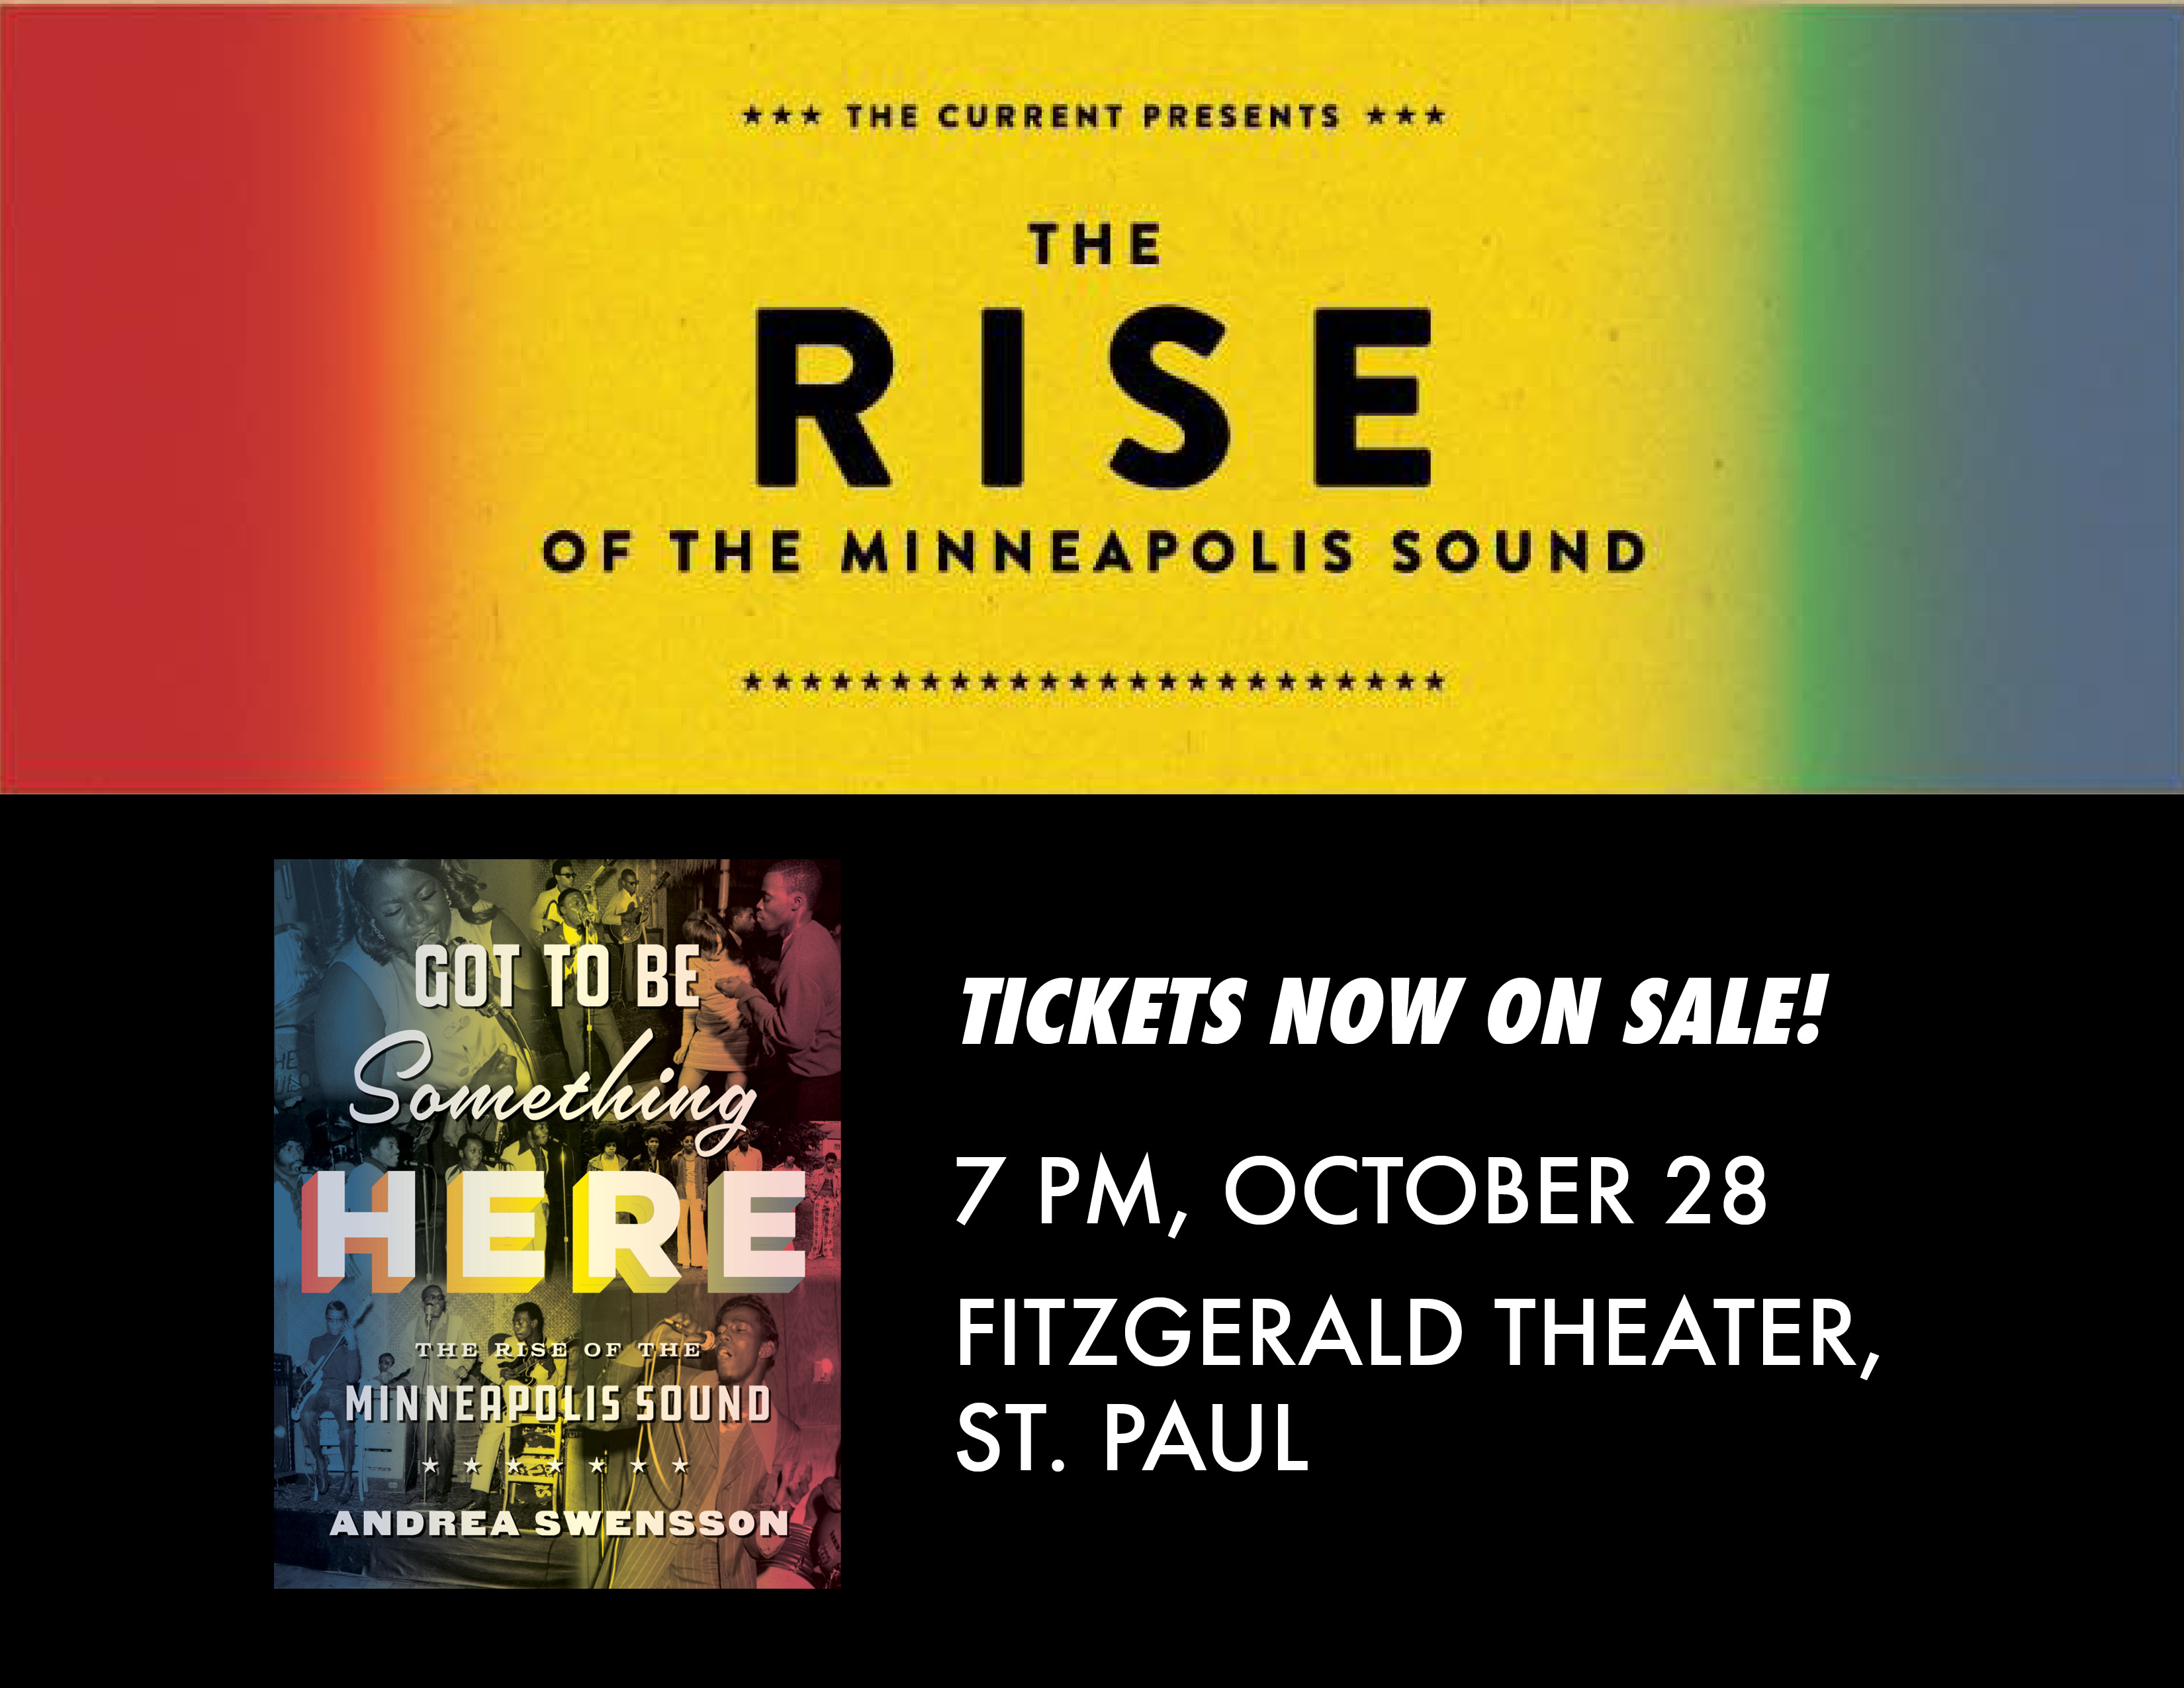 The Current Presents: The Rise of the Minneapolis Sound with Andrea Swensson